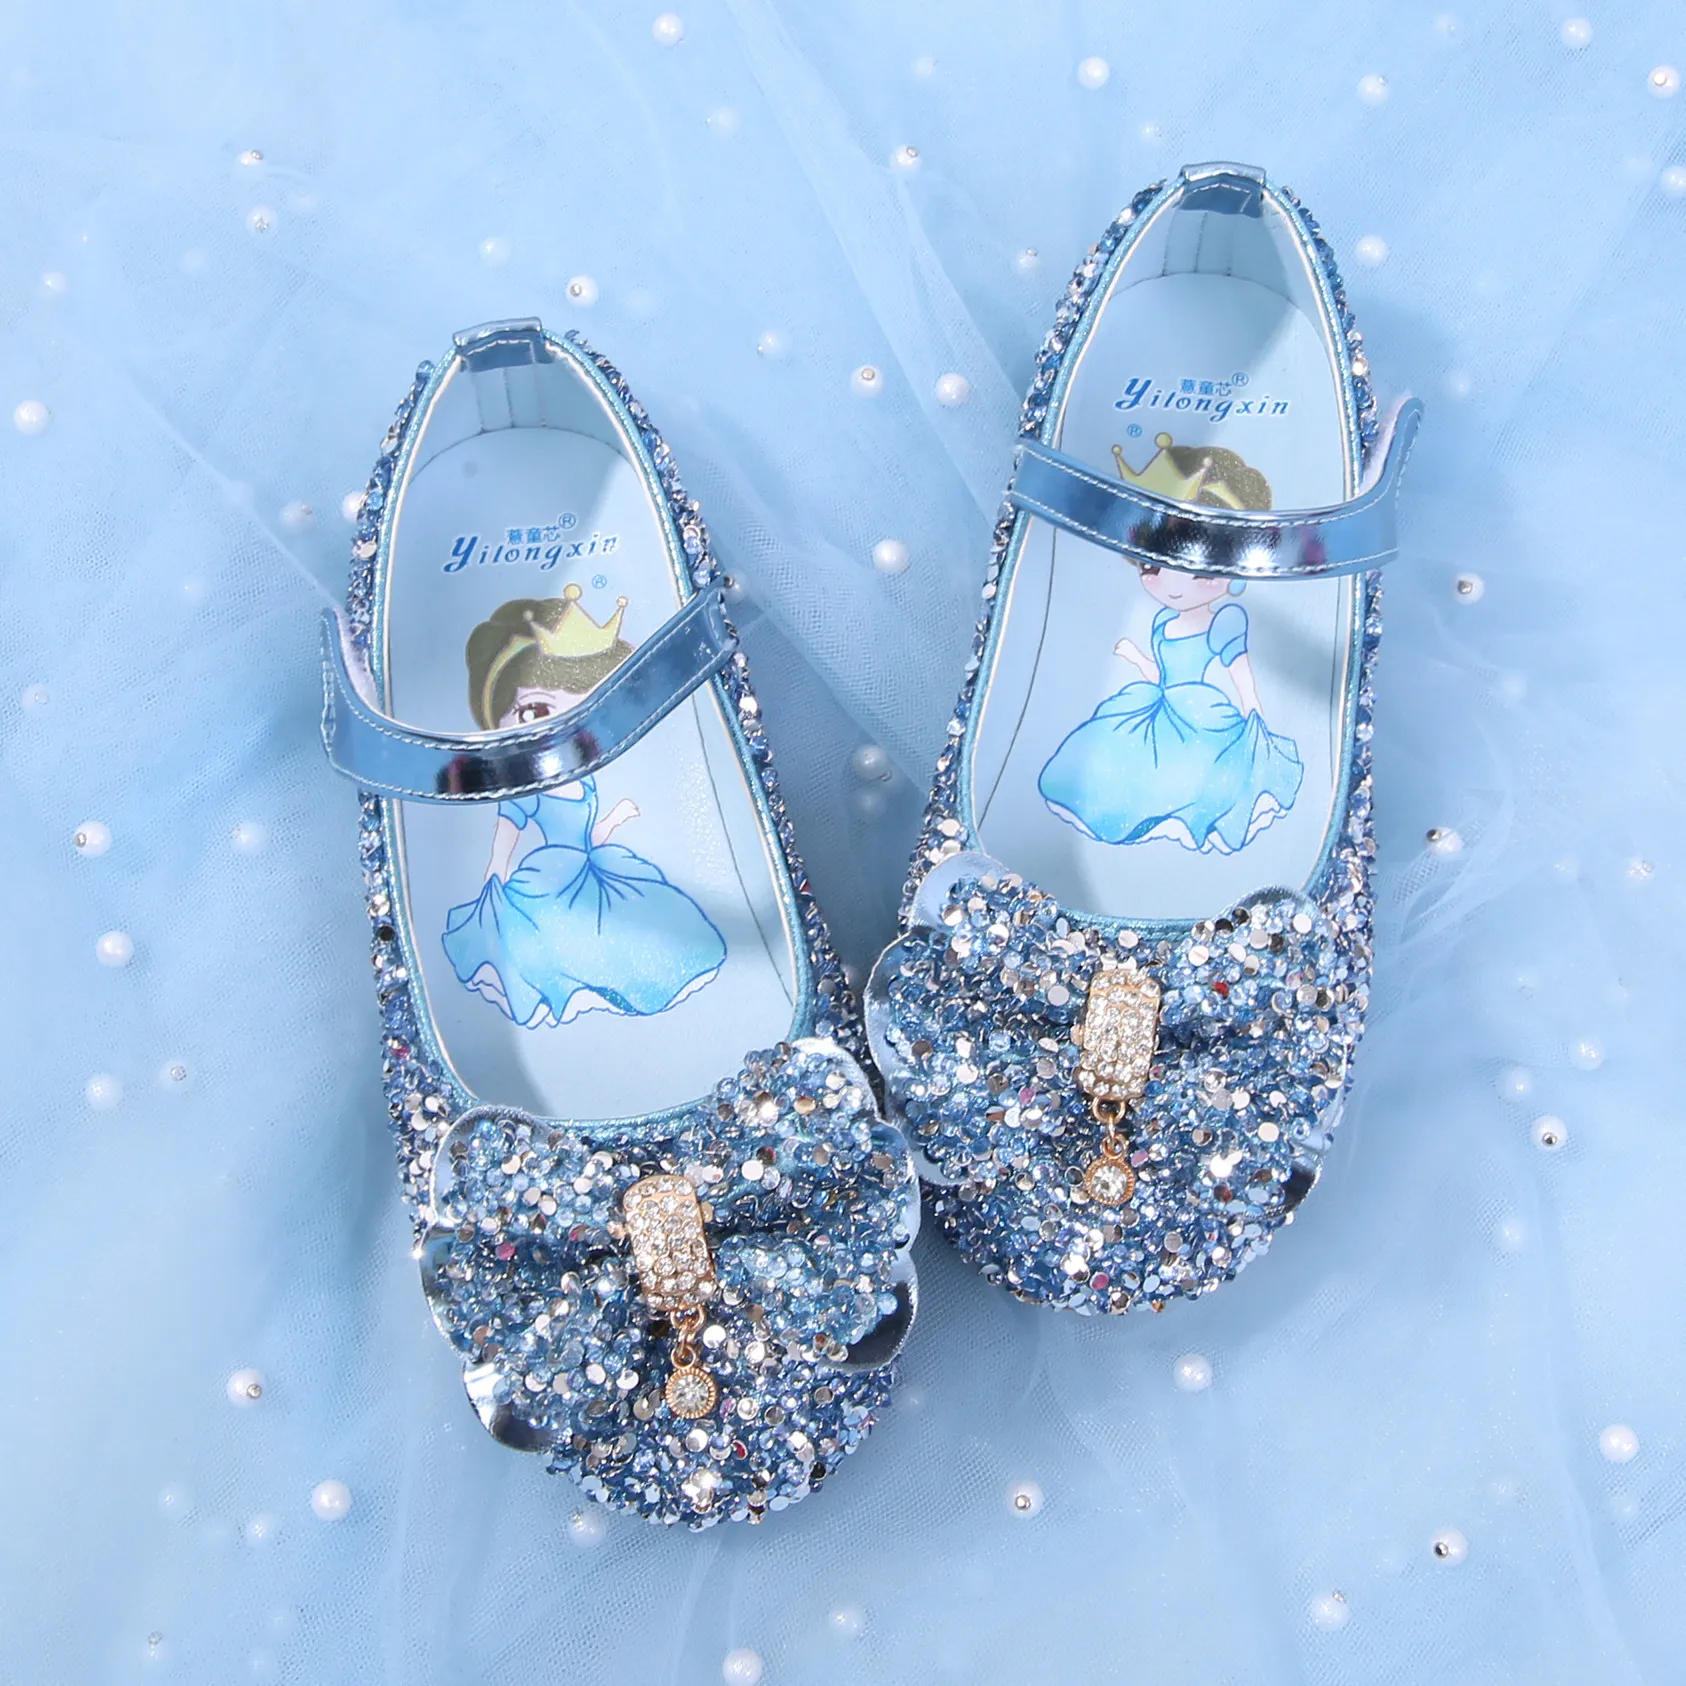 Girls' Single Shoes Princess Shoes Ice And Snow Alsa Crystal Shoes Little Girls' Flat Shoes Children's Soft Shoes